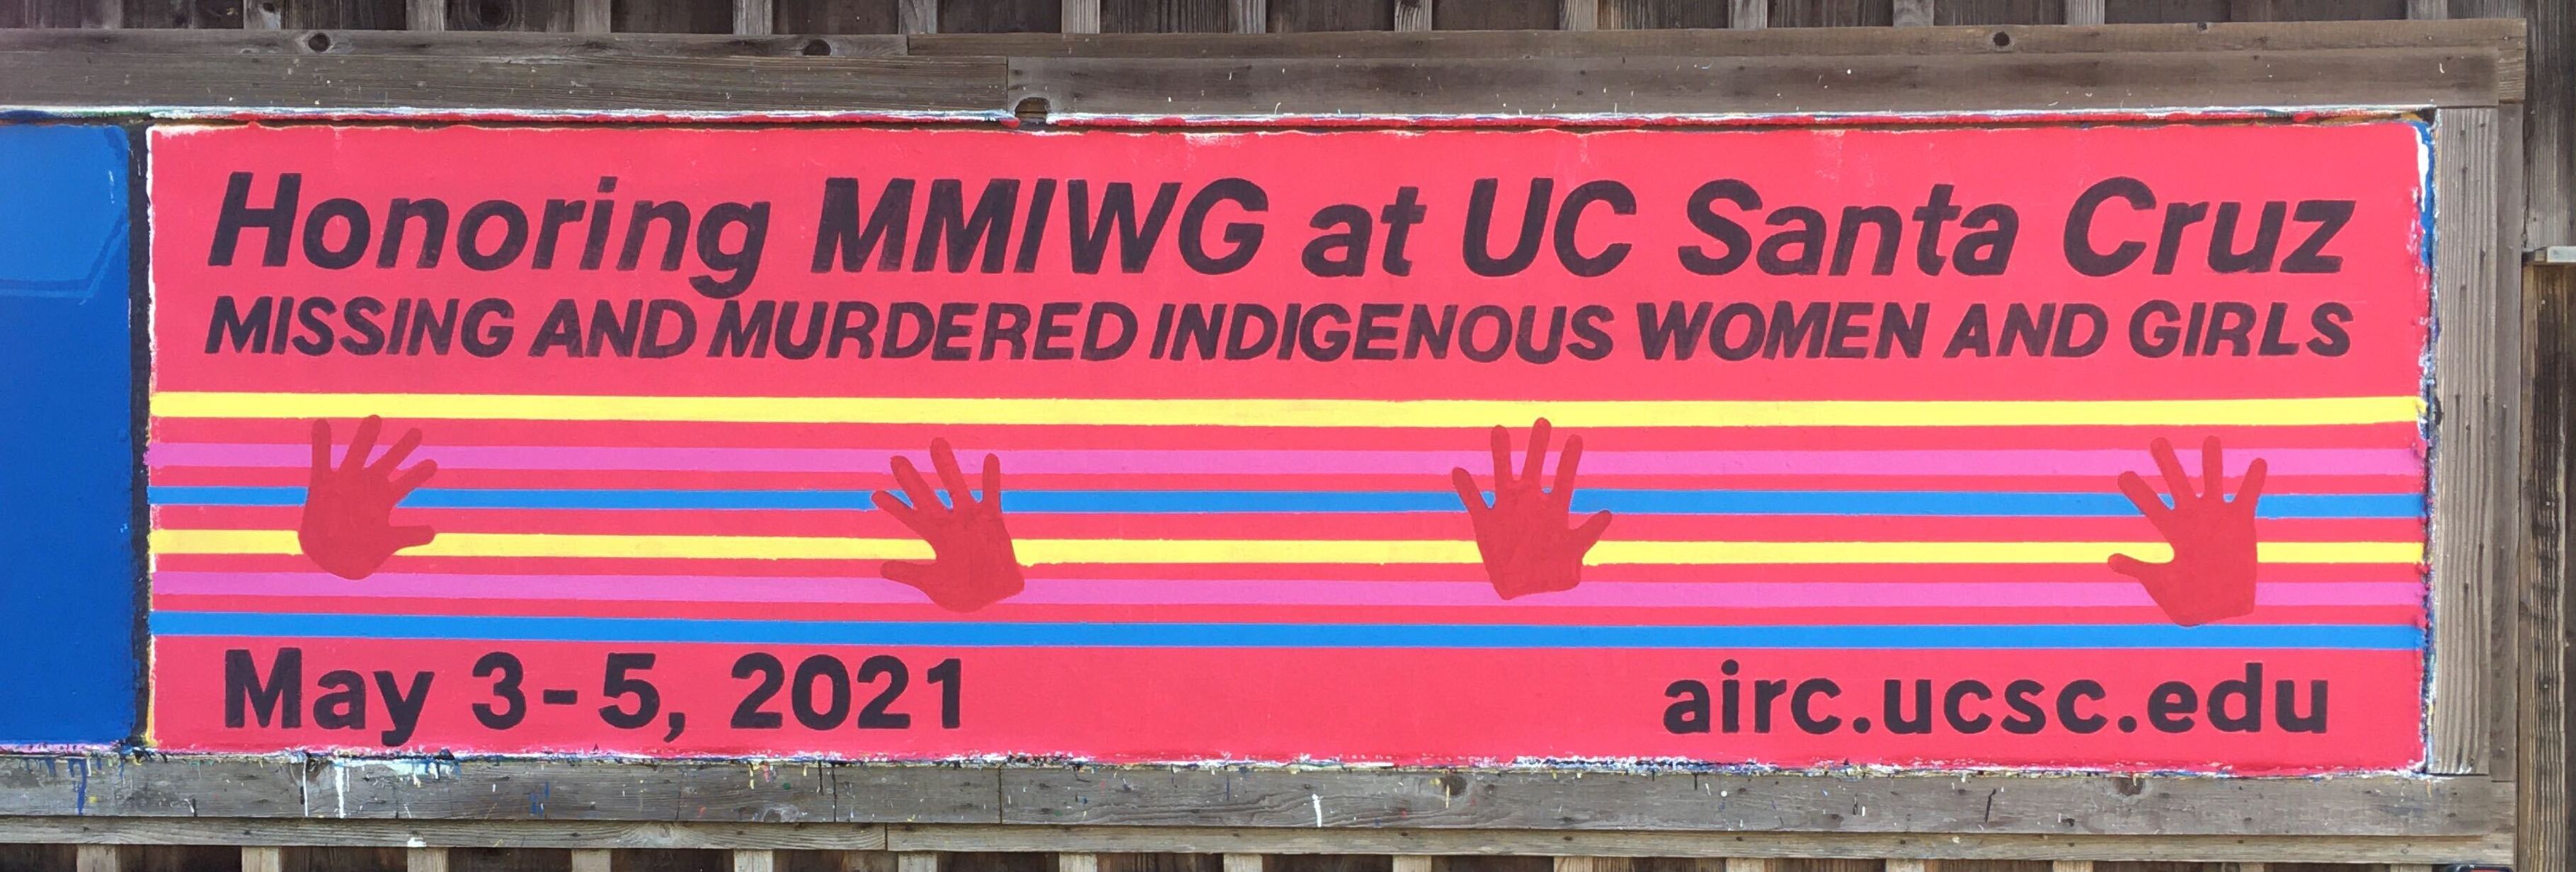 Above is a picture of a hand-painted sign on the barn located at UC Santa Cruz’s campus main entrance to promote the AIRC’s MMIWG virtual event series, 2021 